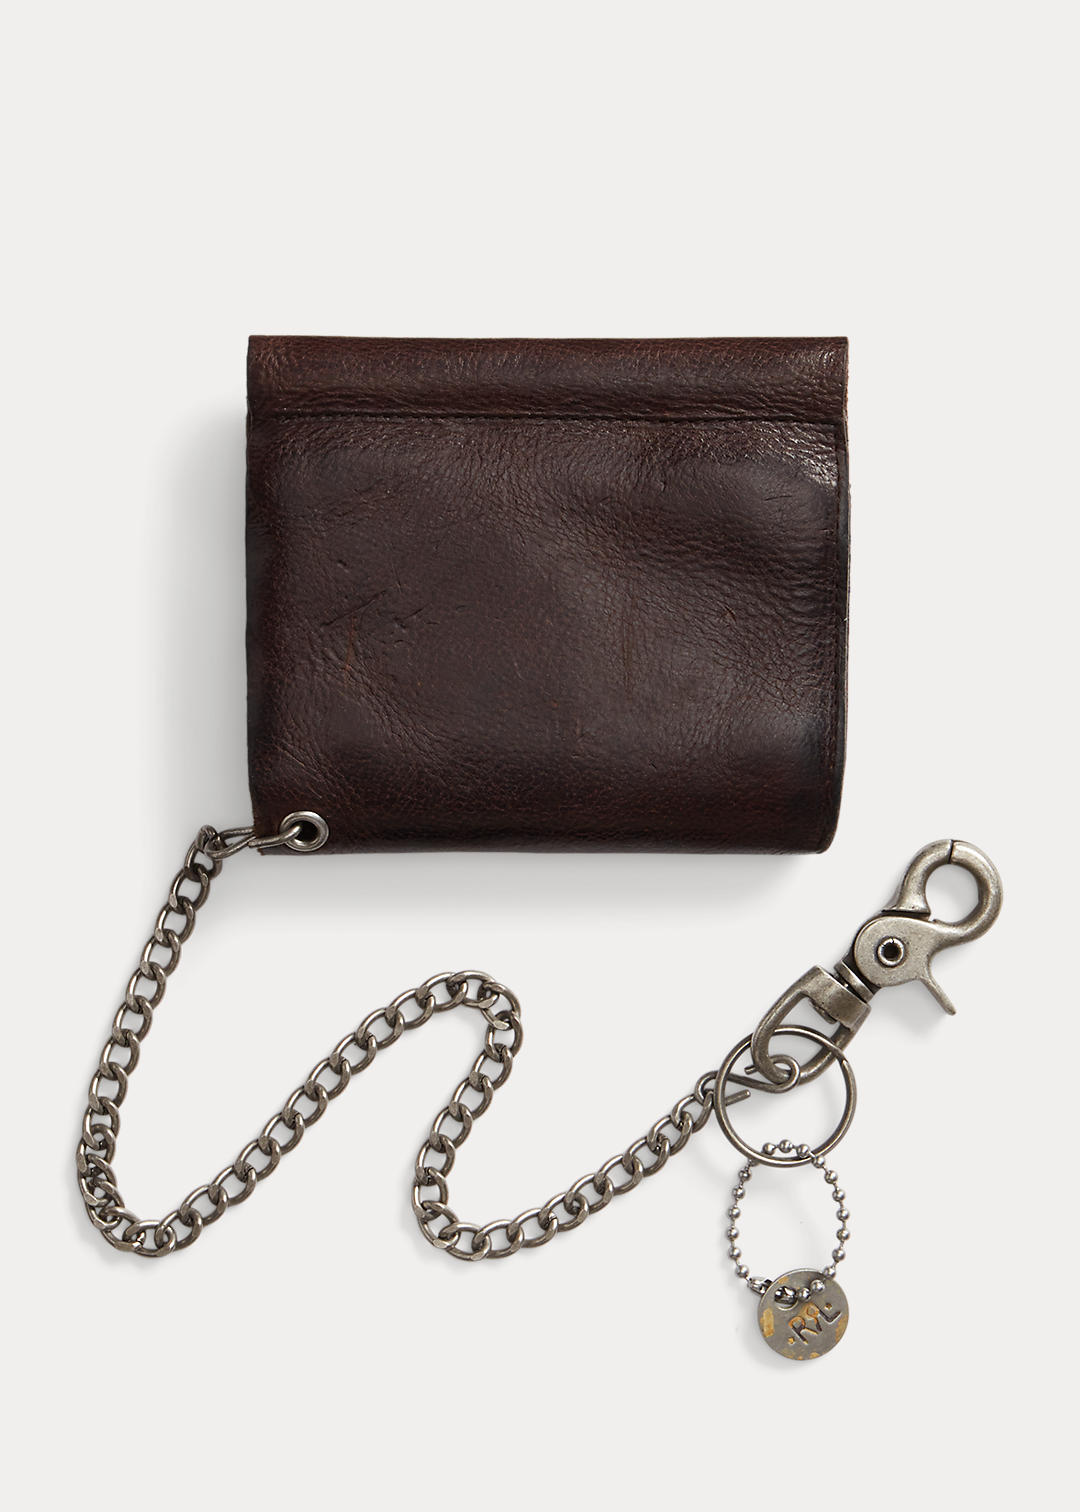 RRL Concho Leather Chain Wallet 2